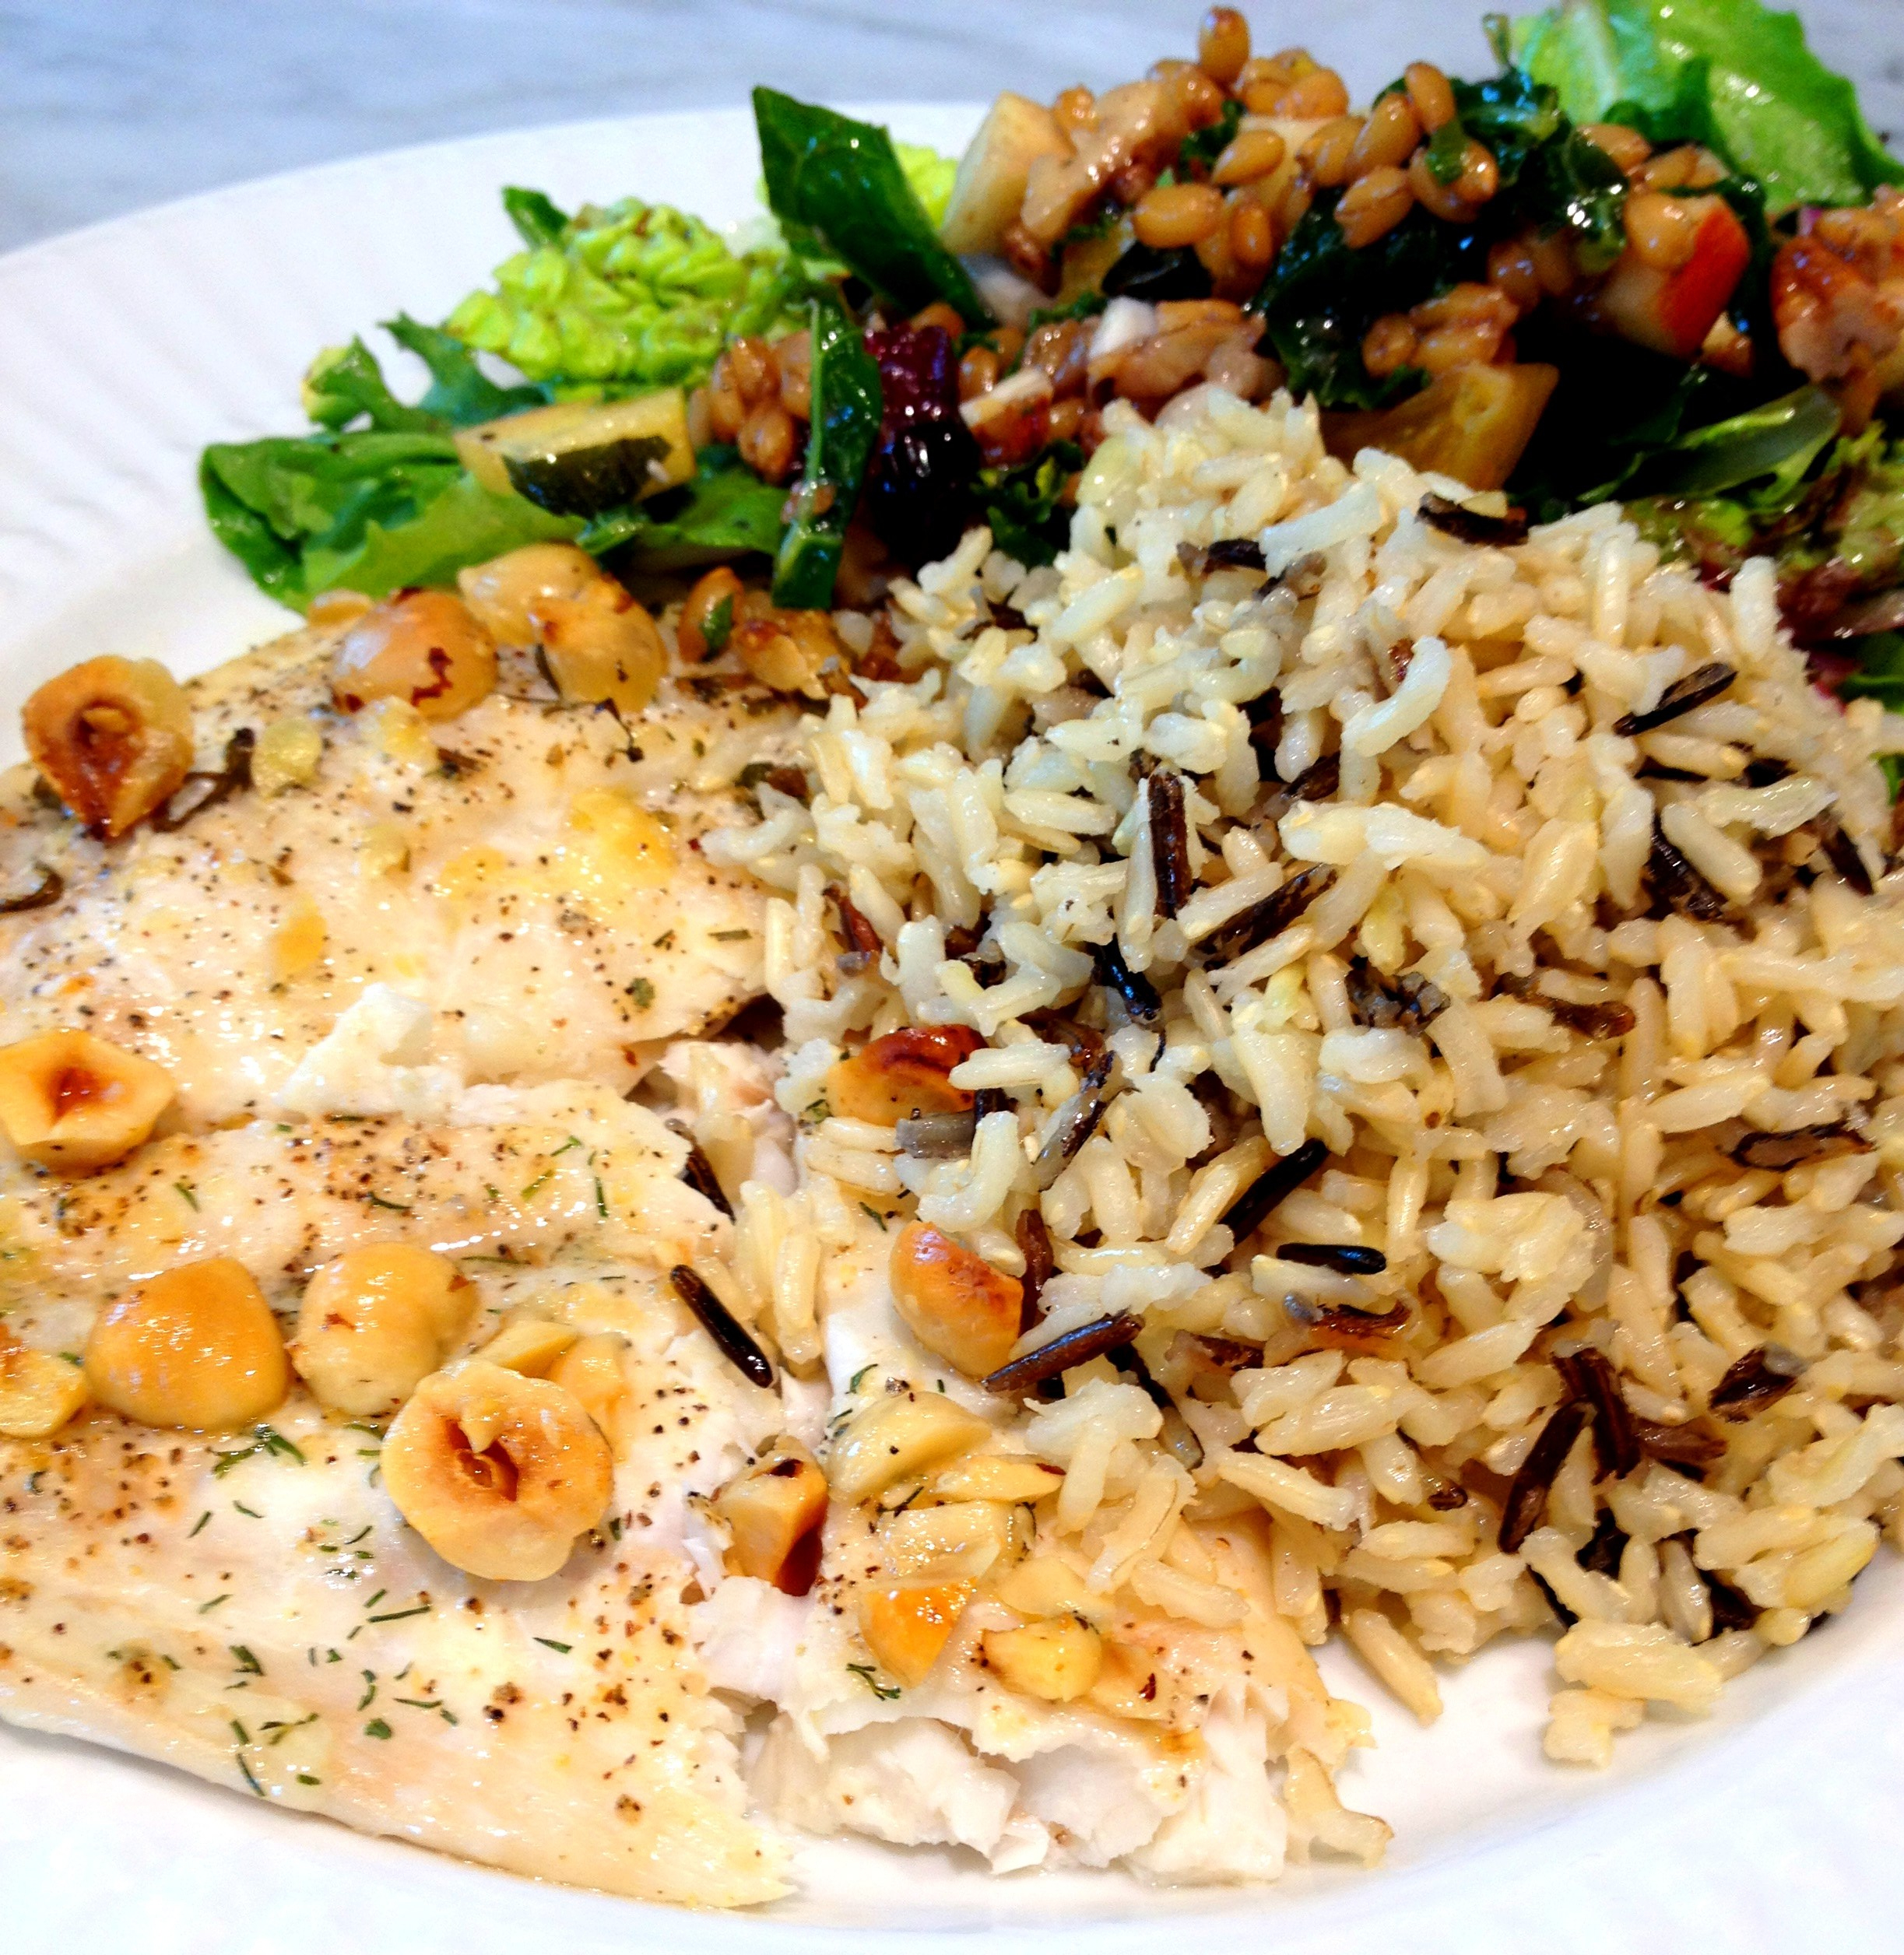 filet of sole with hazelnut butter, wild rice, and wheatberry salad